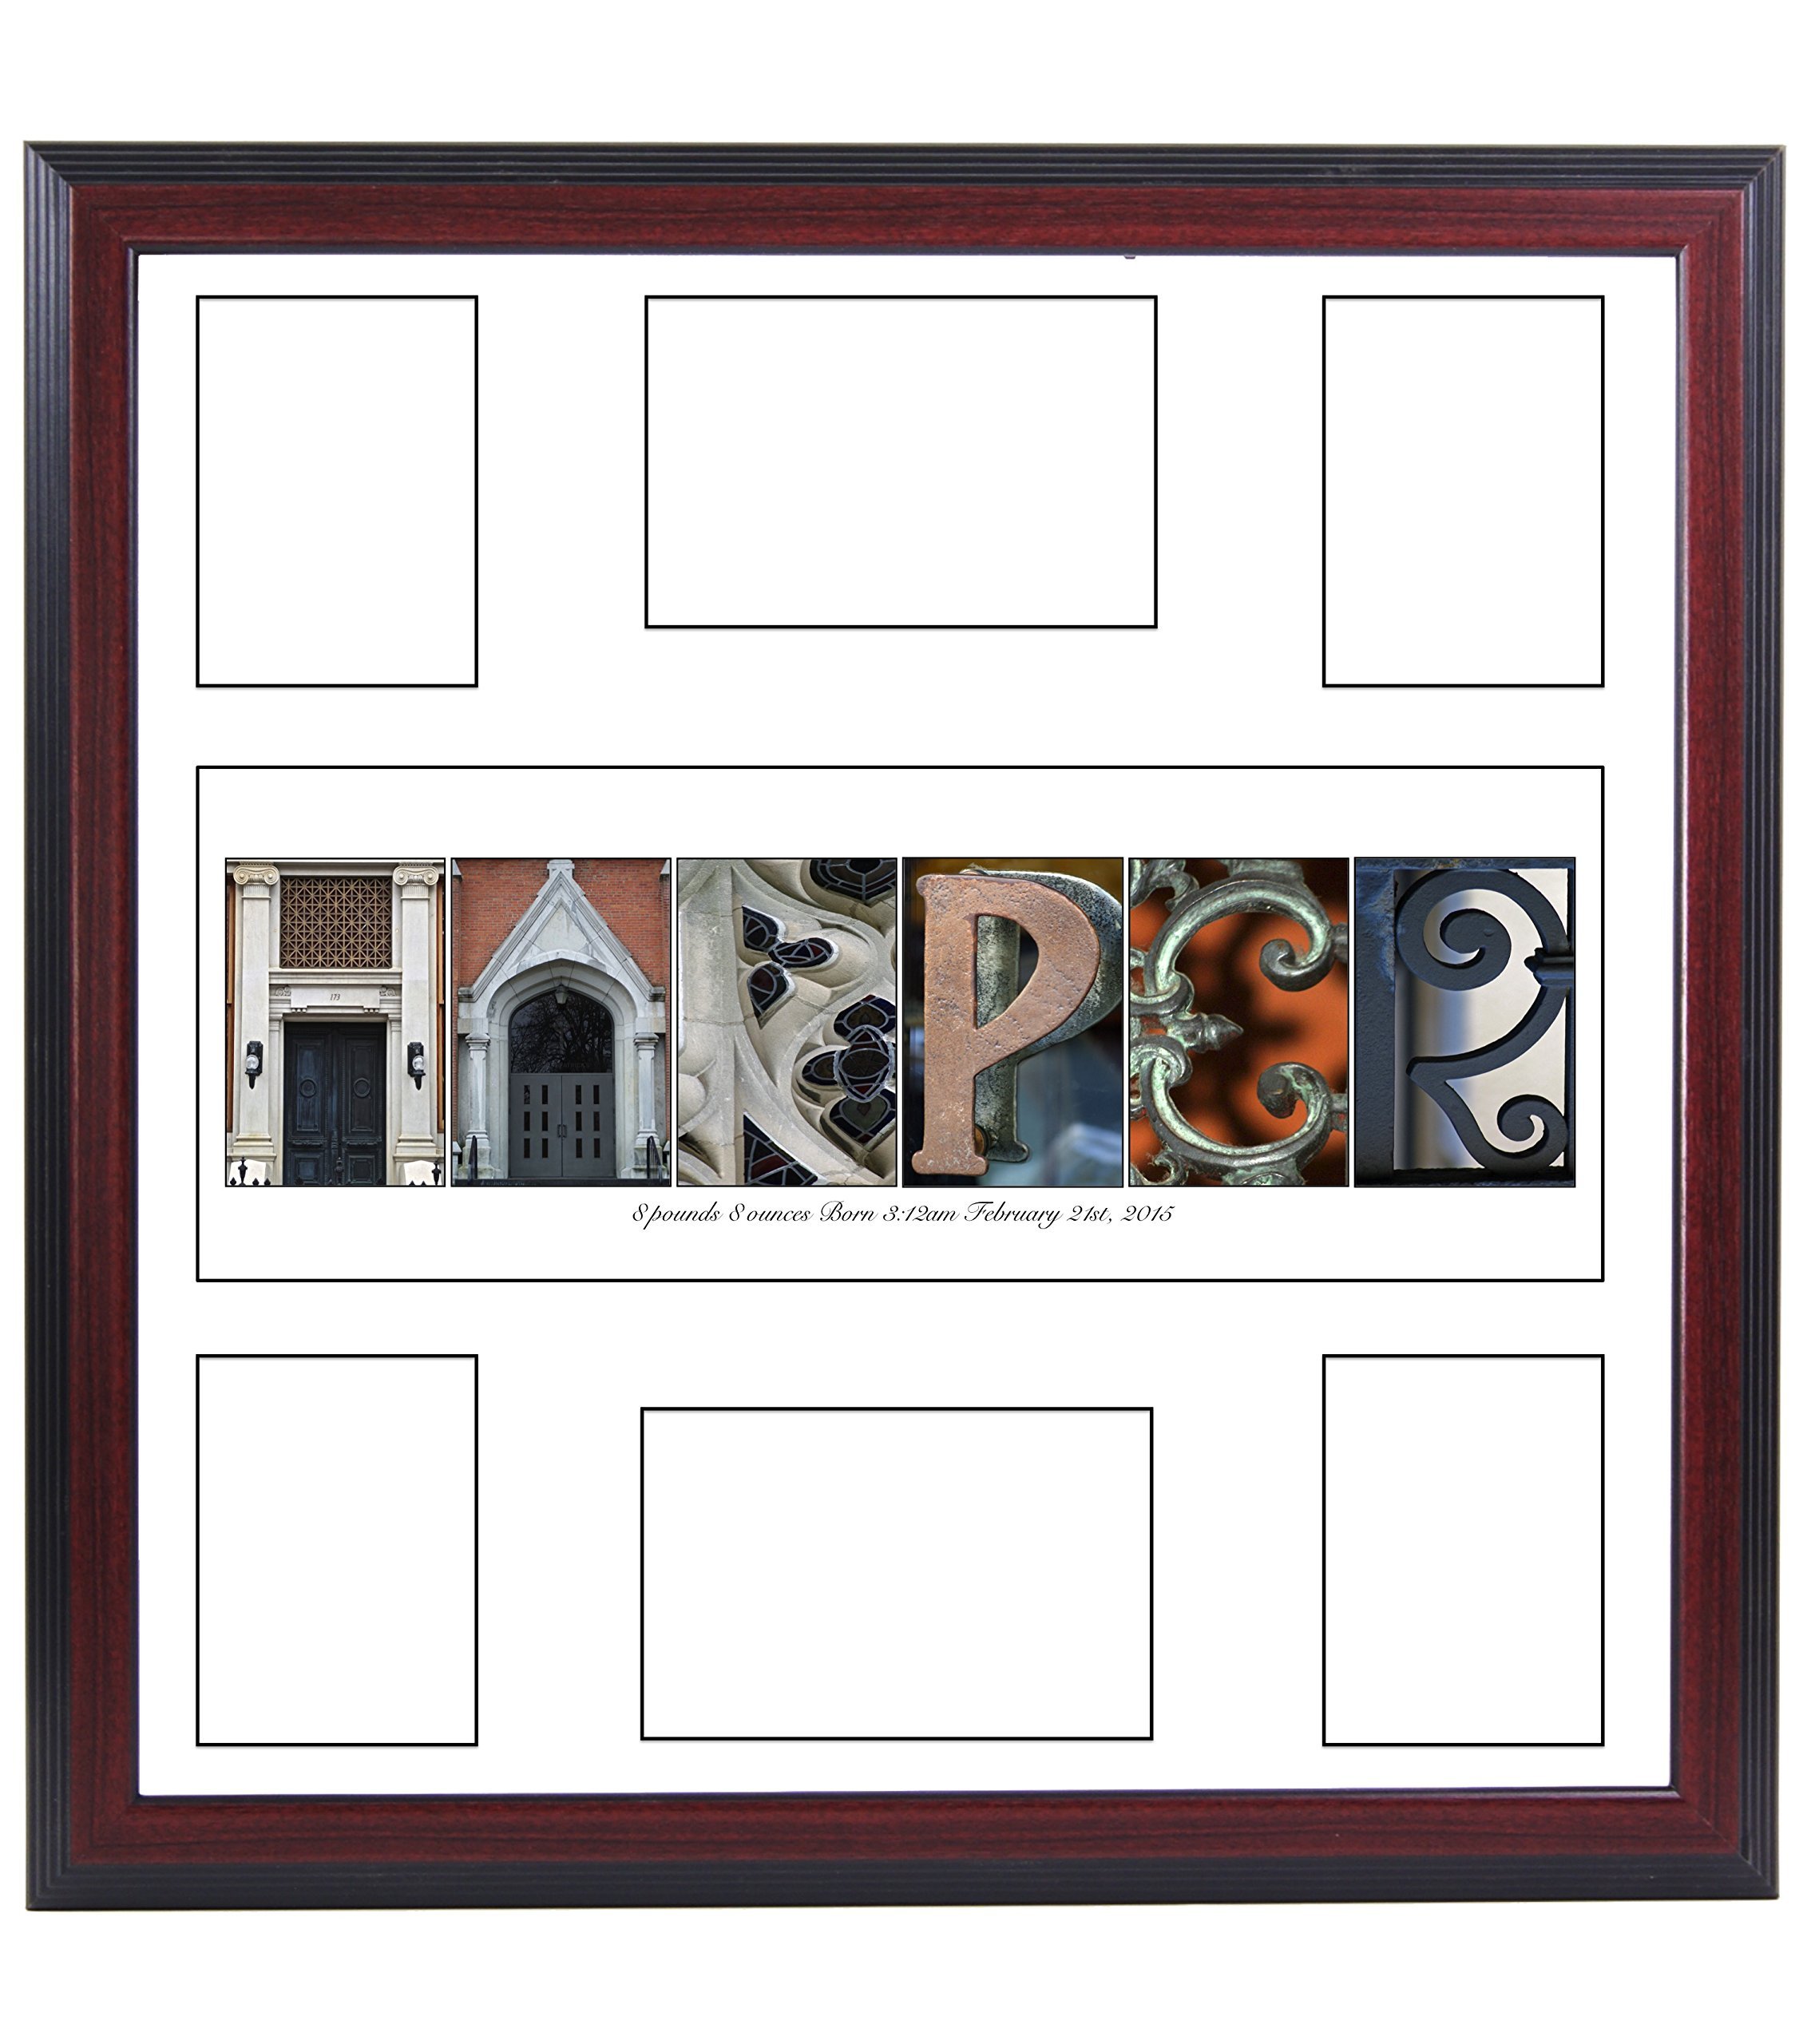 Creative Letter Art Personalized Children?s Guest Registry with 6 Opening Name Collage, 20 by 20 inch Frame Included for Newborn, Christening?s Bar Mitzvah & Graduations